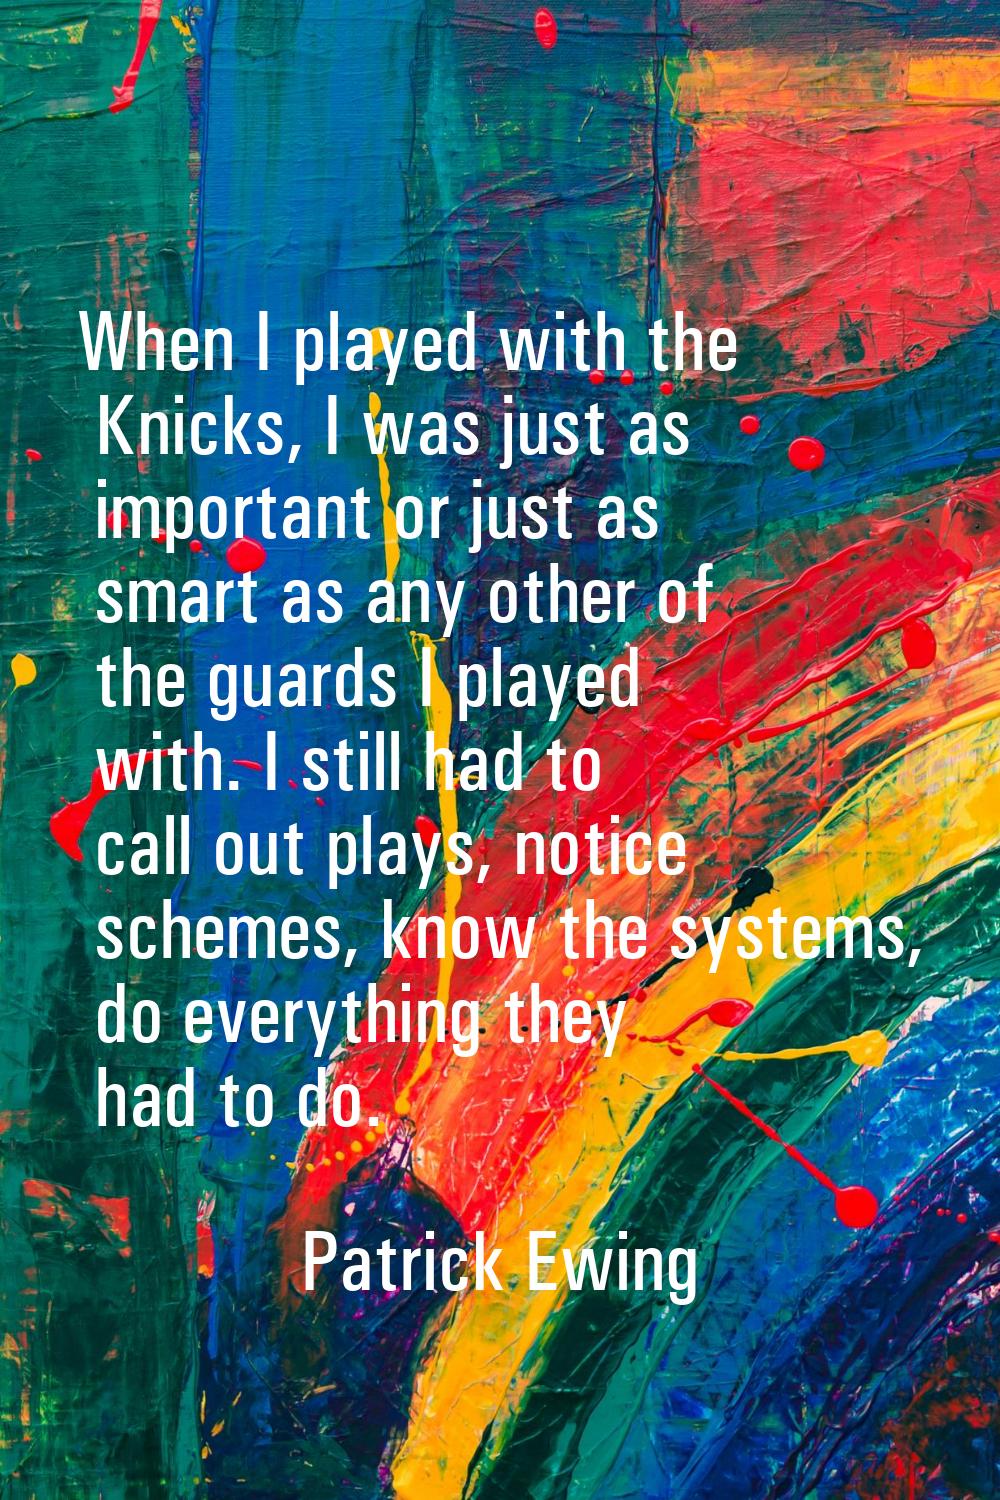 When I played with the Knicks, I was just as important or just as smart as any other of the guards 